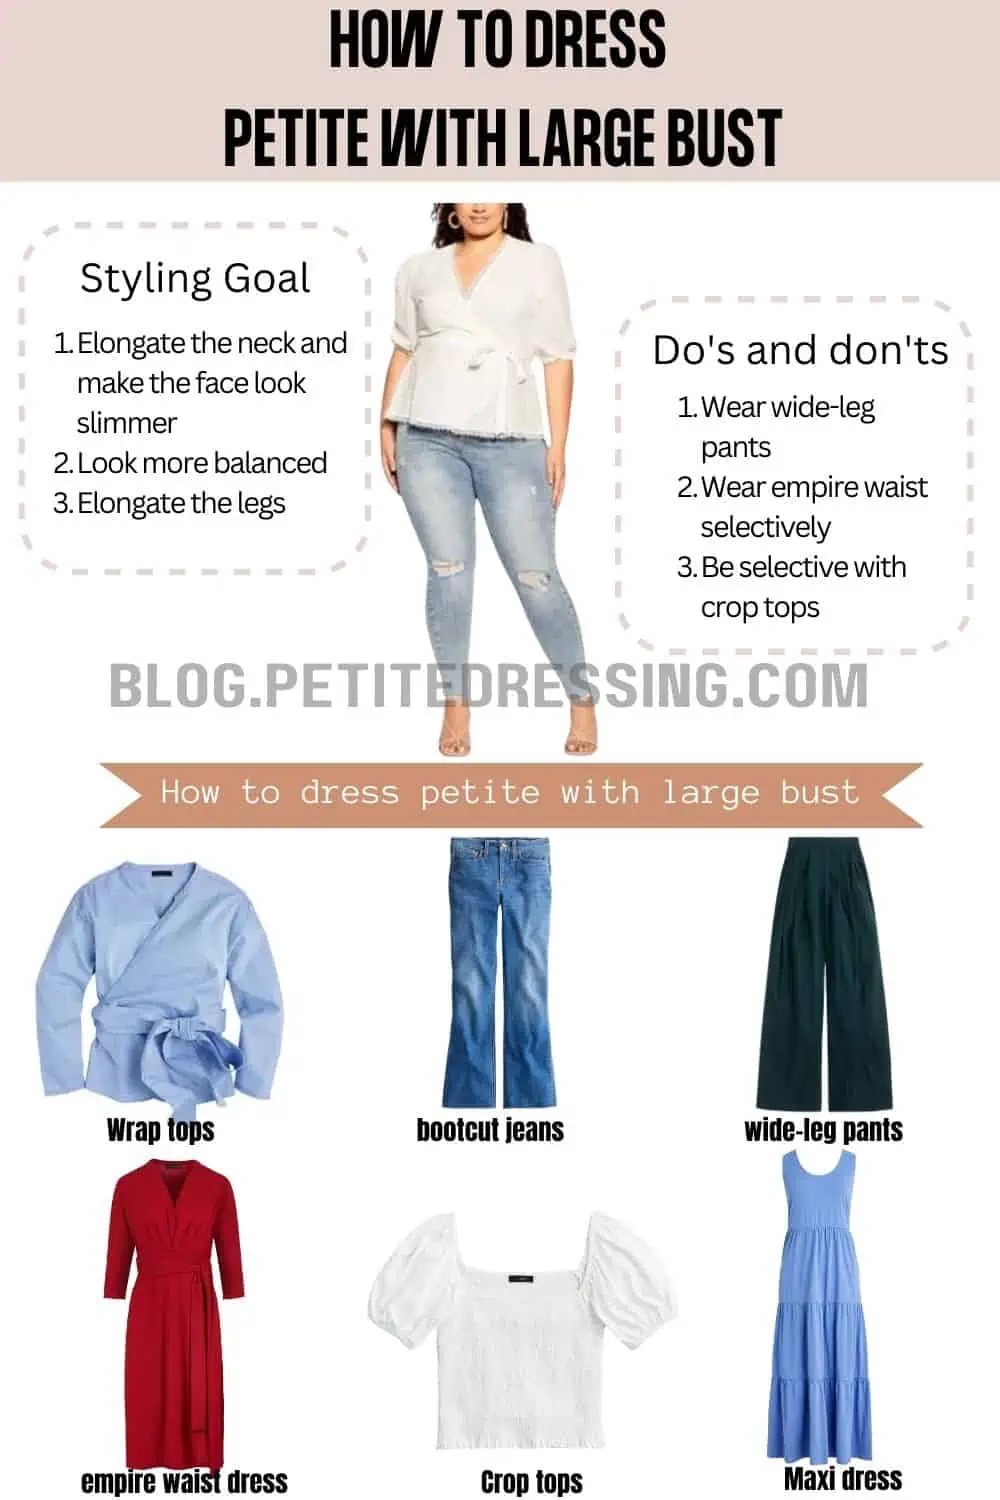 https://blog.petitedressing.com/wp-content/uploads/2022/08/How-to-dress-petite-with-large-bust.webp